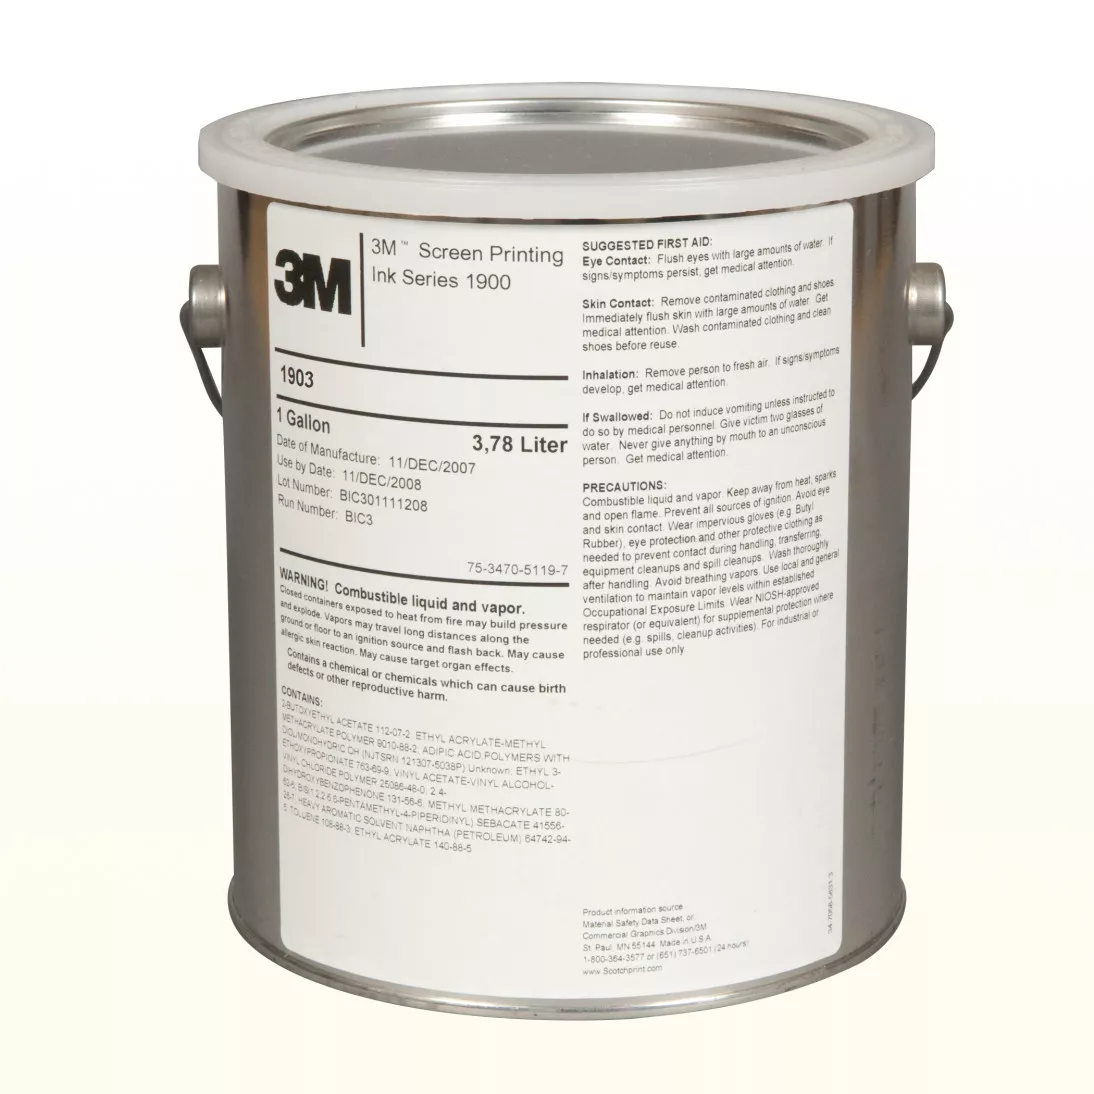 3M™ Screen Printing Ink 1903, White, 1 Gallon Container